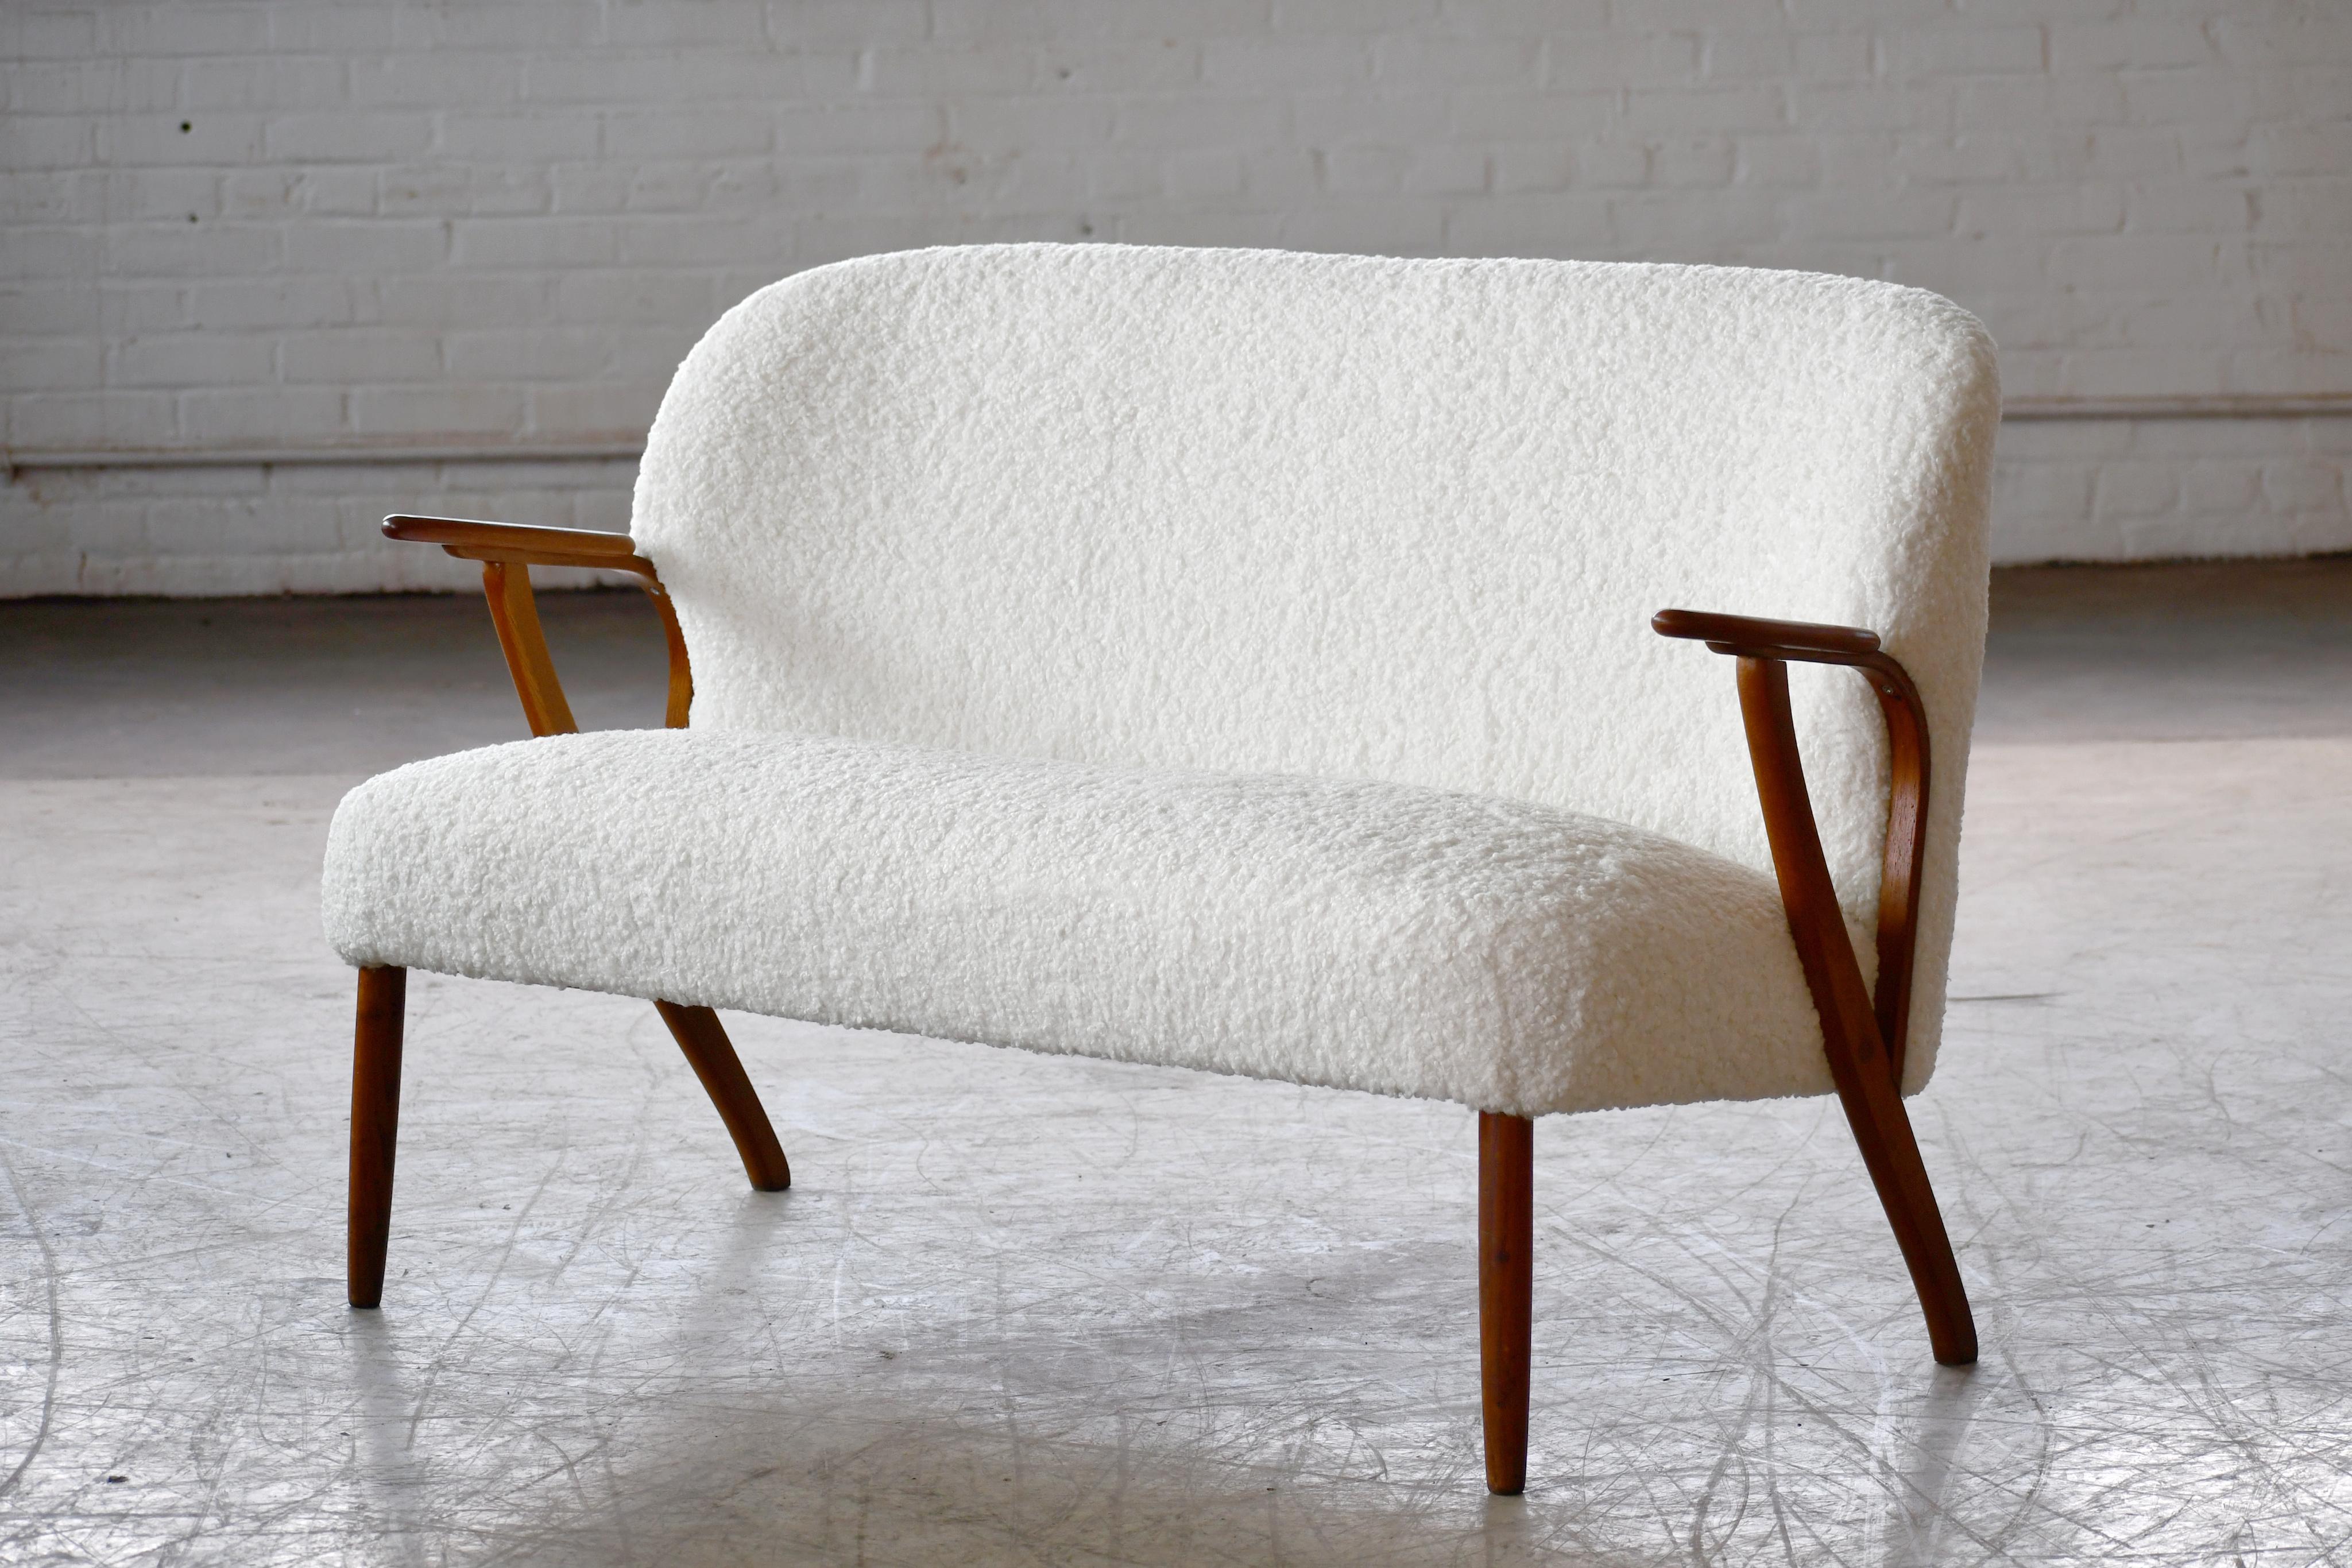 Beautiful and elegant small 1950s Danish settee with legs and armrests in solid teak. The high quality woodwork and design is very much in the style of Arne Hovmand Olsen and generally this piece is attributed to him, however, the attribution has